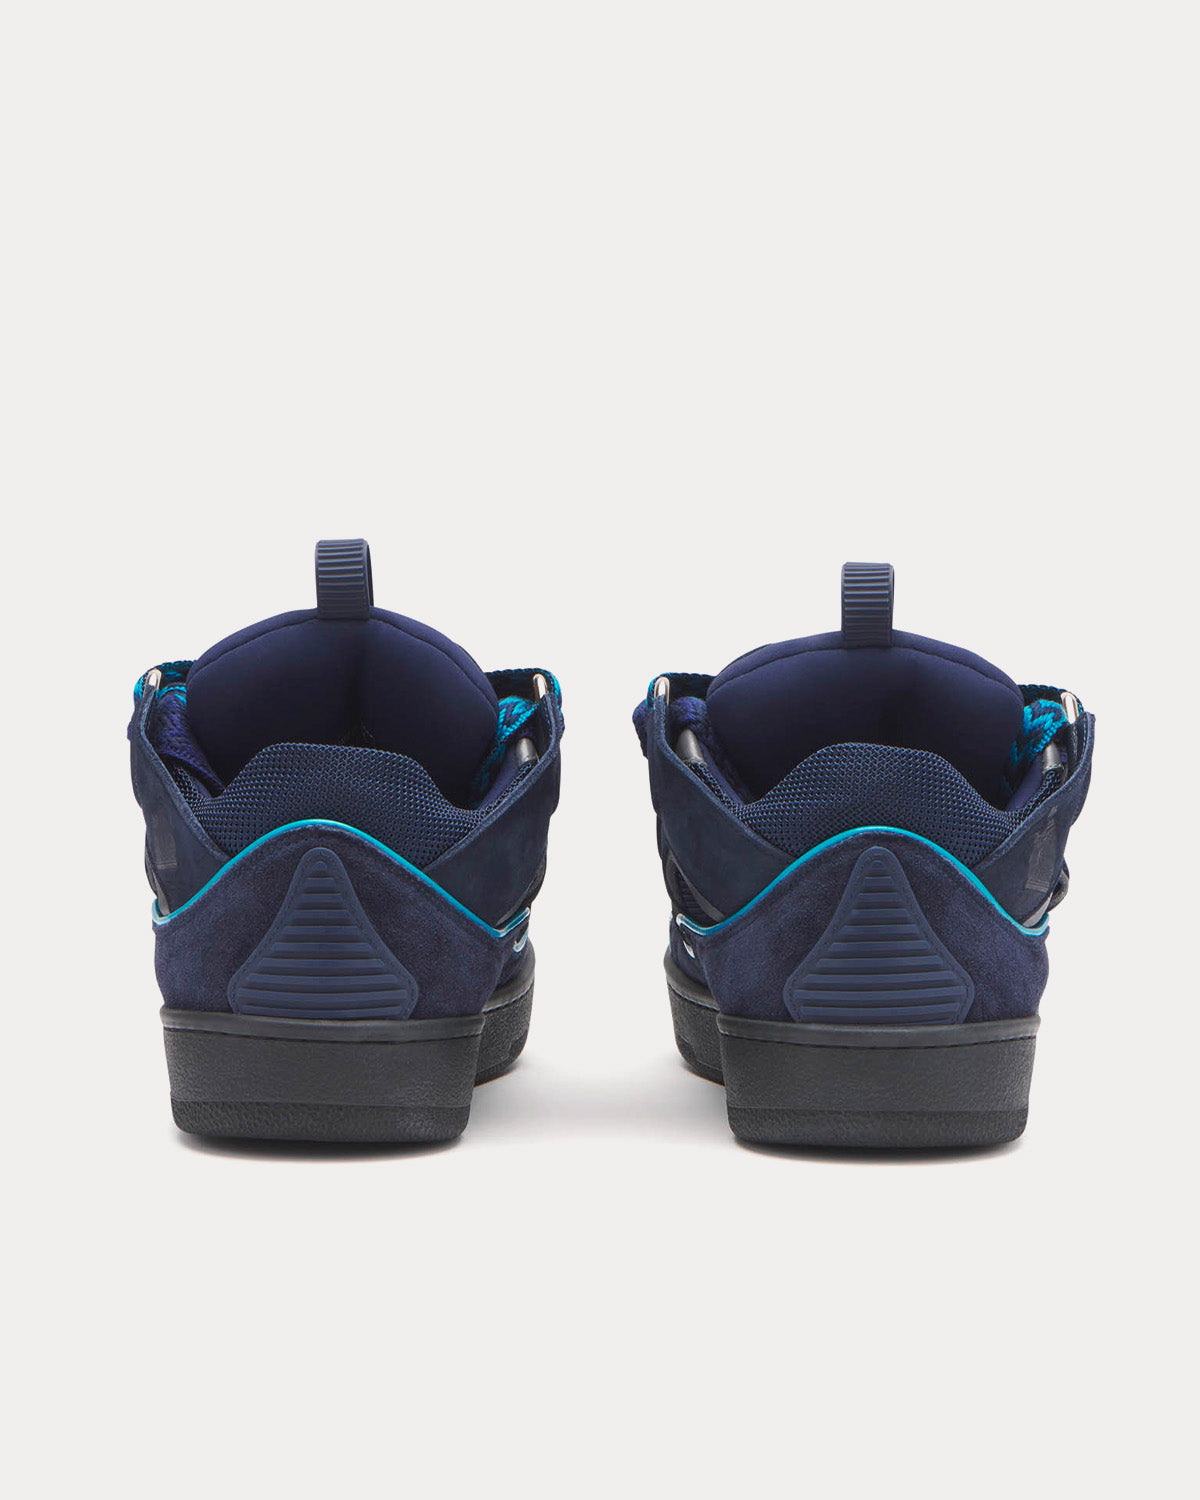 Lanvin - Curb Leather Navy Blue Low Top Sneakers